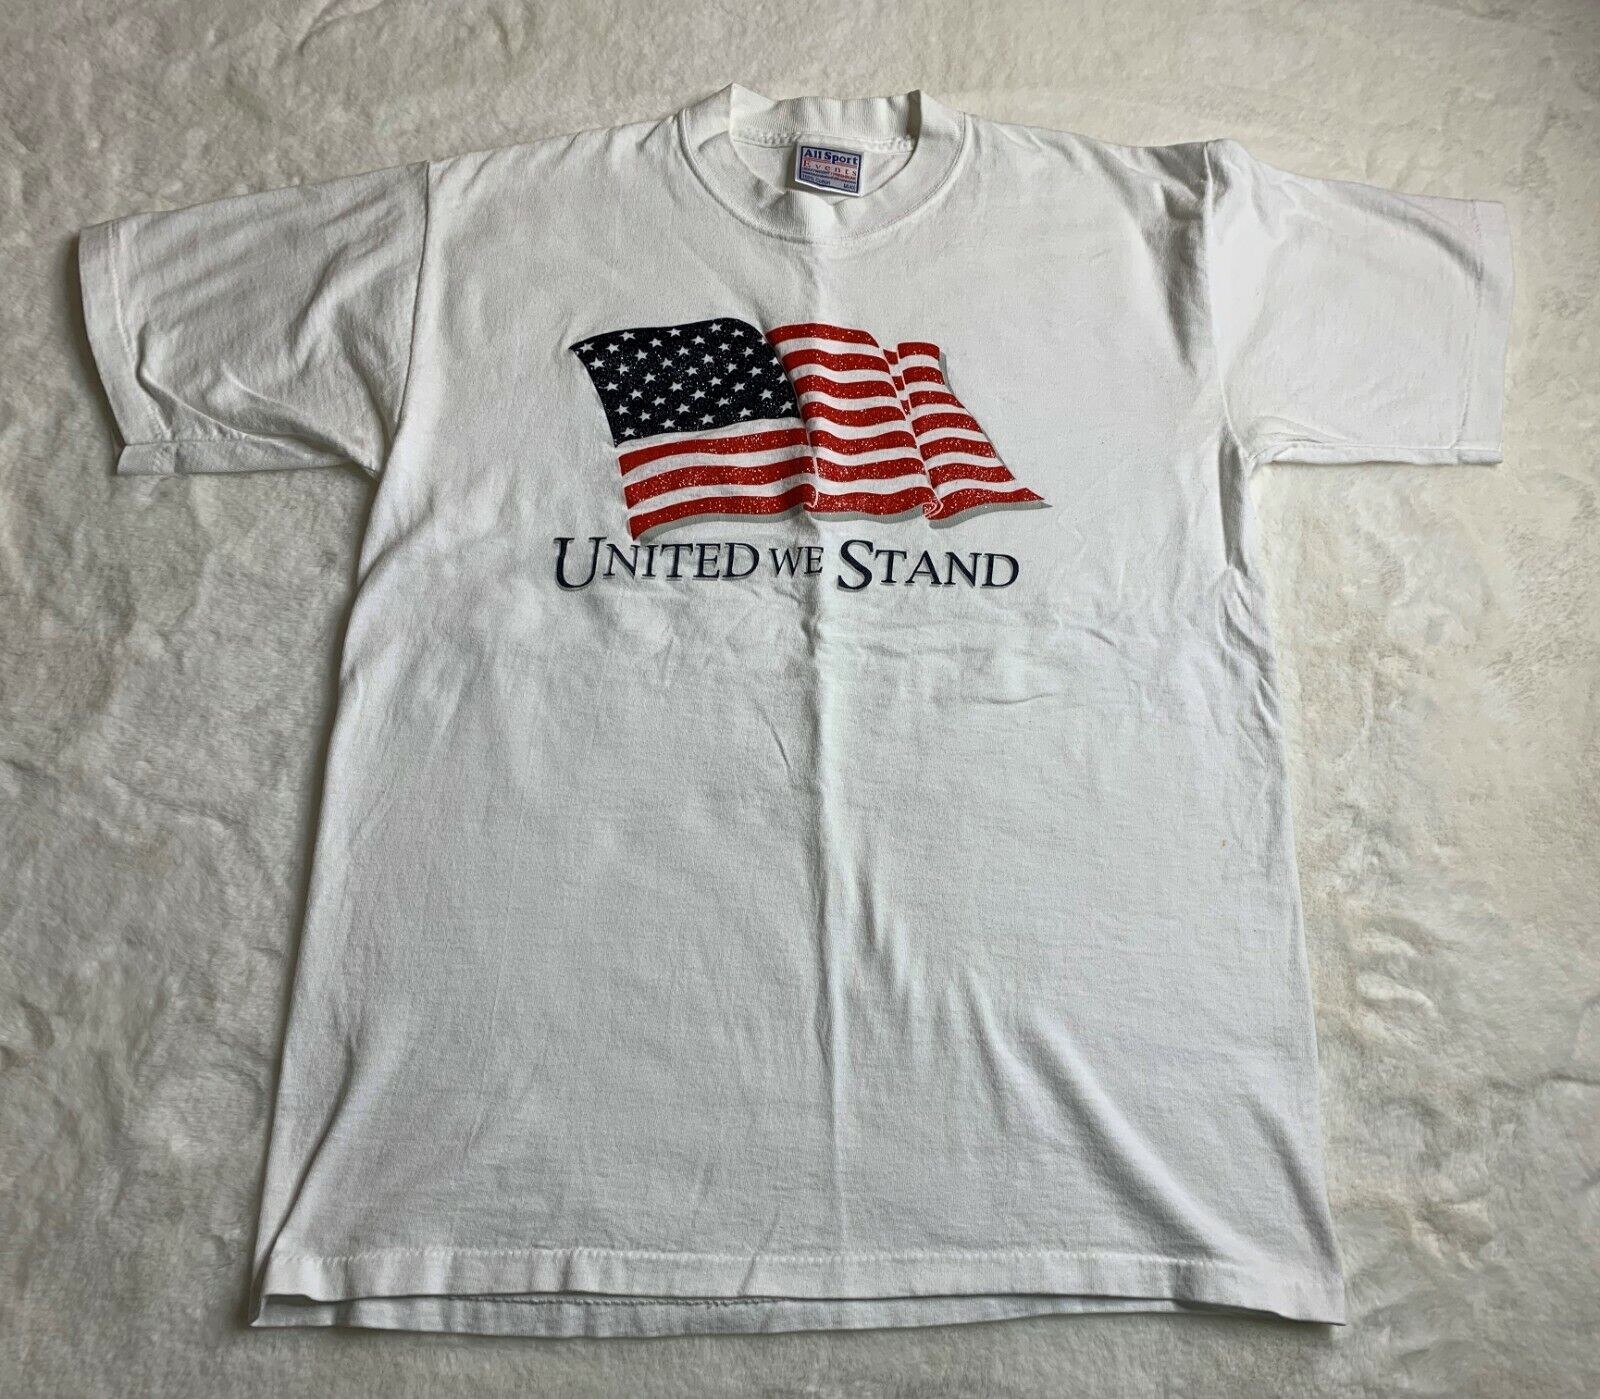 Vintage All Sport United We Stand White T Shirt Glittered Textured Single Stitch